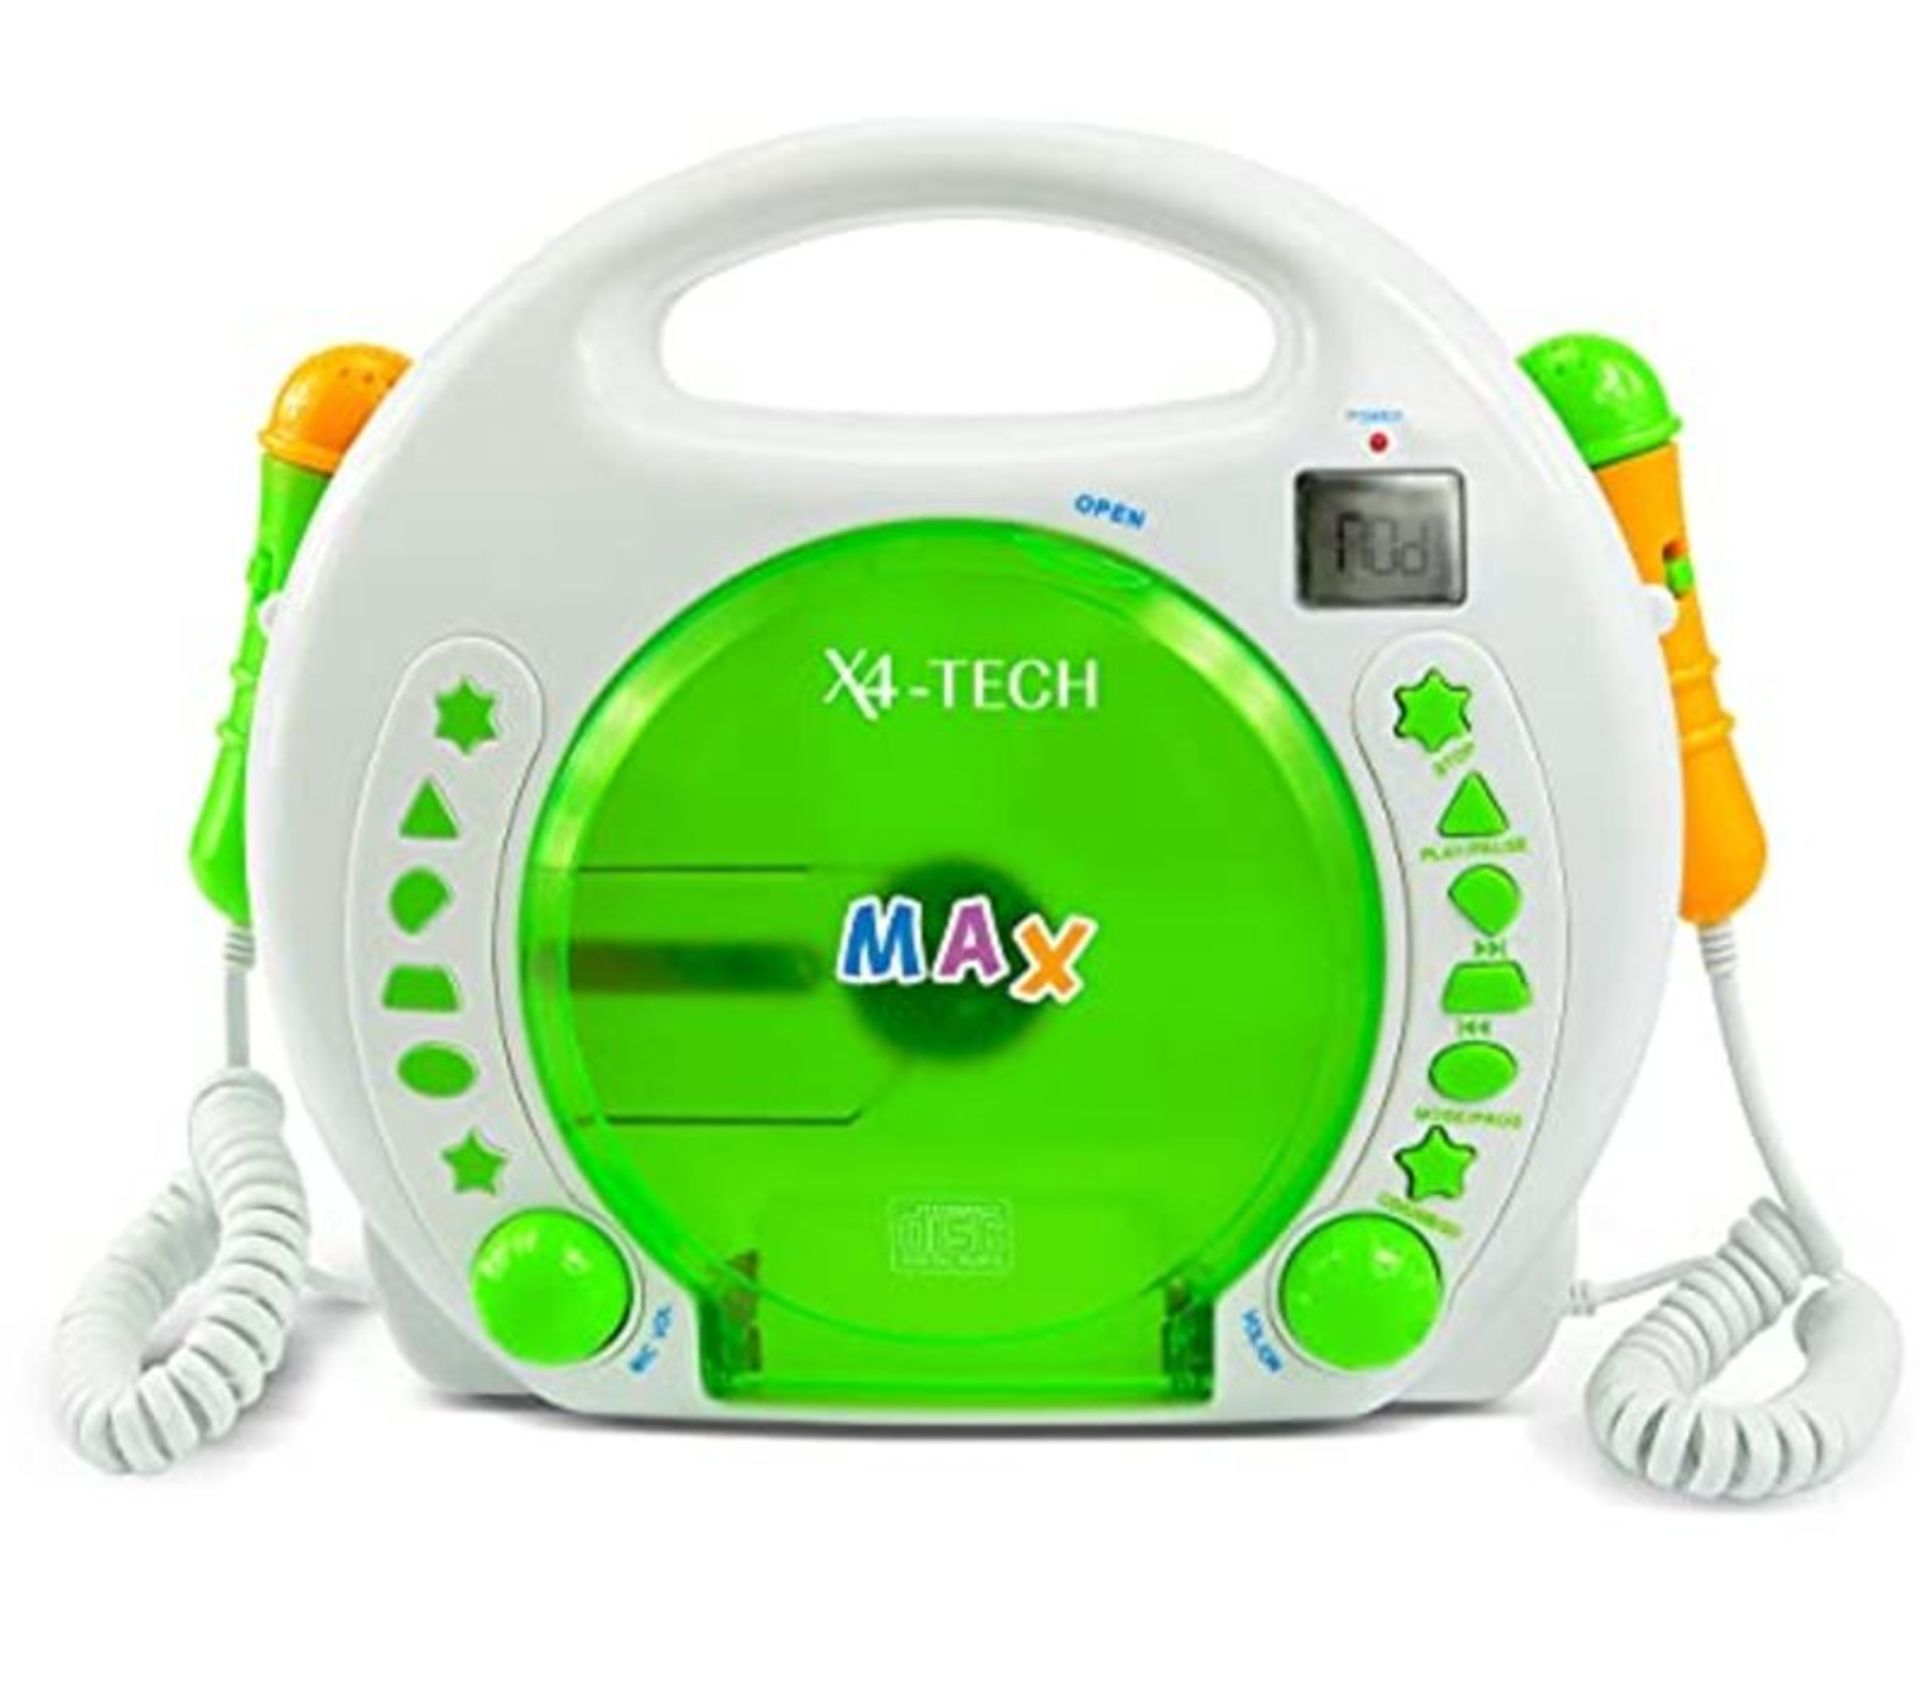 X4-TECH children's CD player Bobby Joey MP3 with battery and power supply